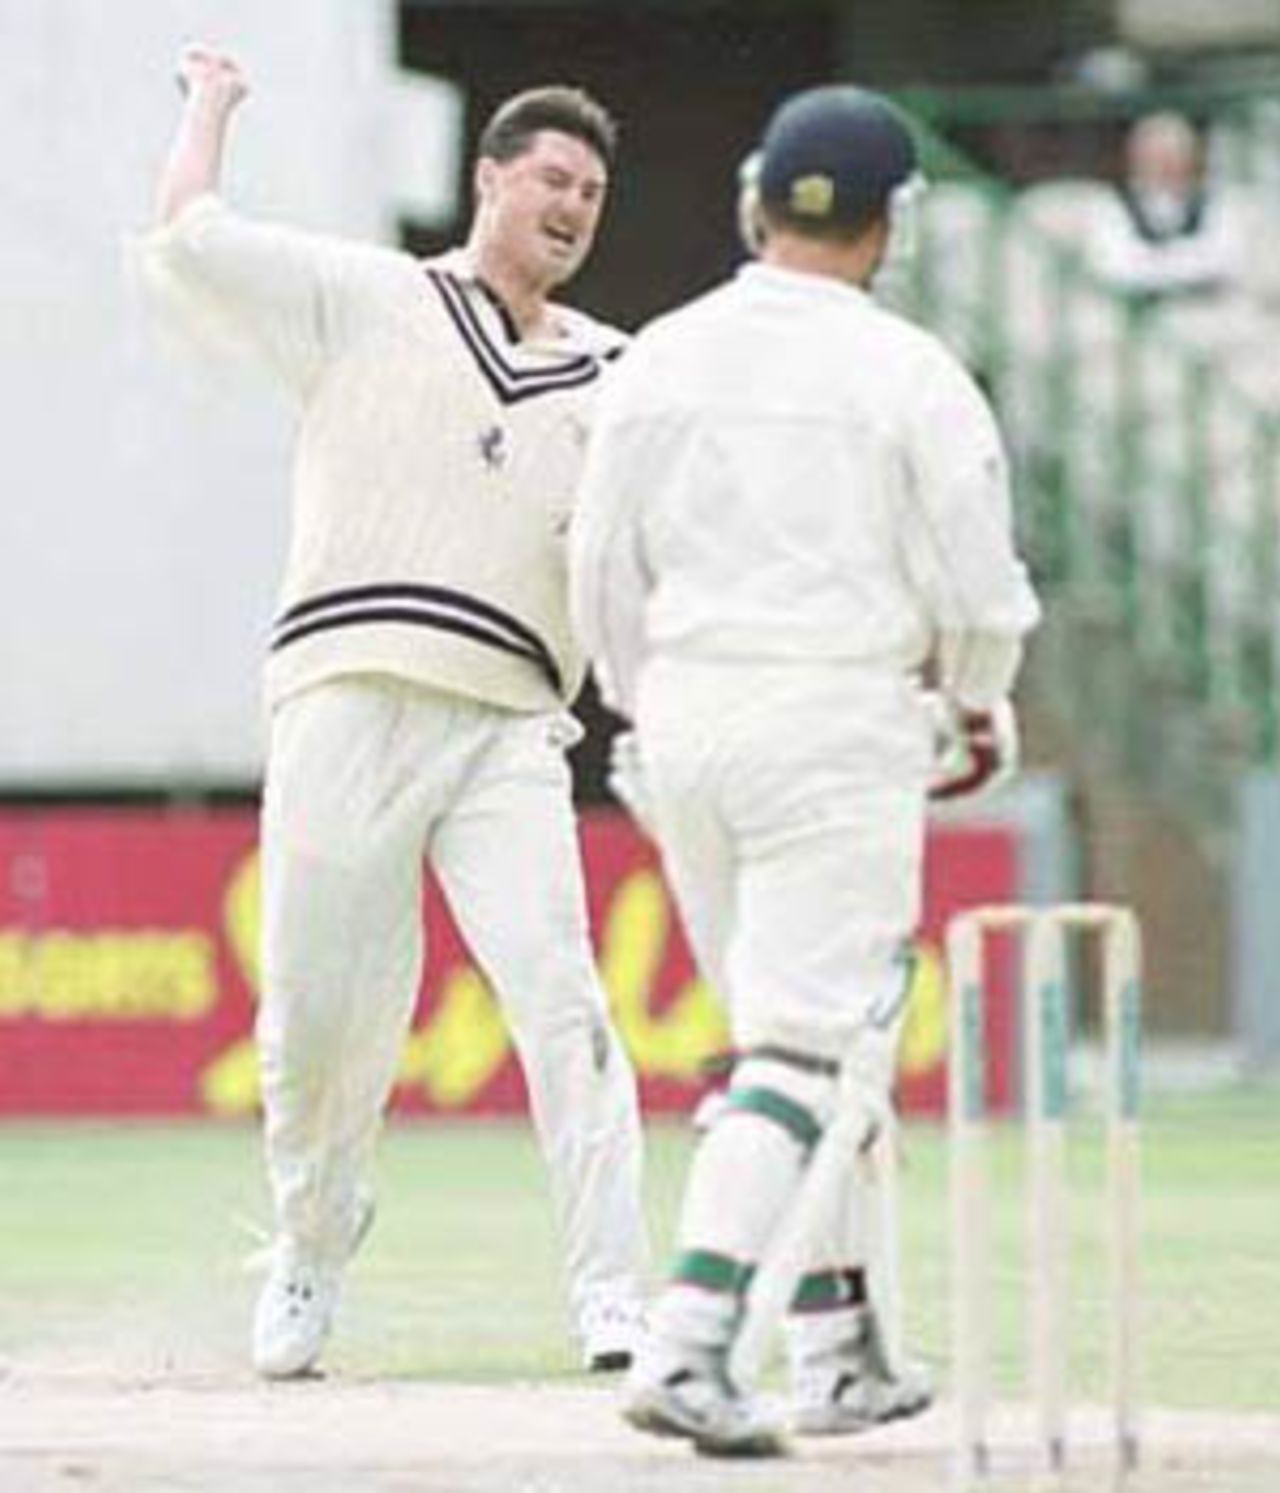 Martin McCague celebrates trapping Hegg LBW, PPP healthcare County Championship Division One, 2000, Lancashire v Kent, Old Trafford, Manchester, 17-20 August 2000(Day 2).